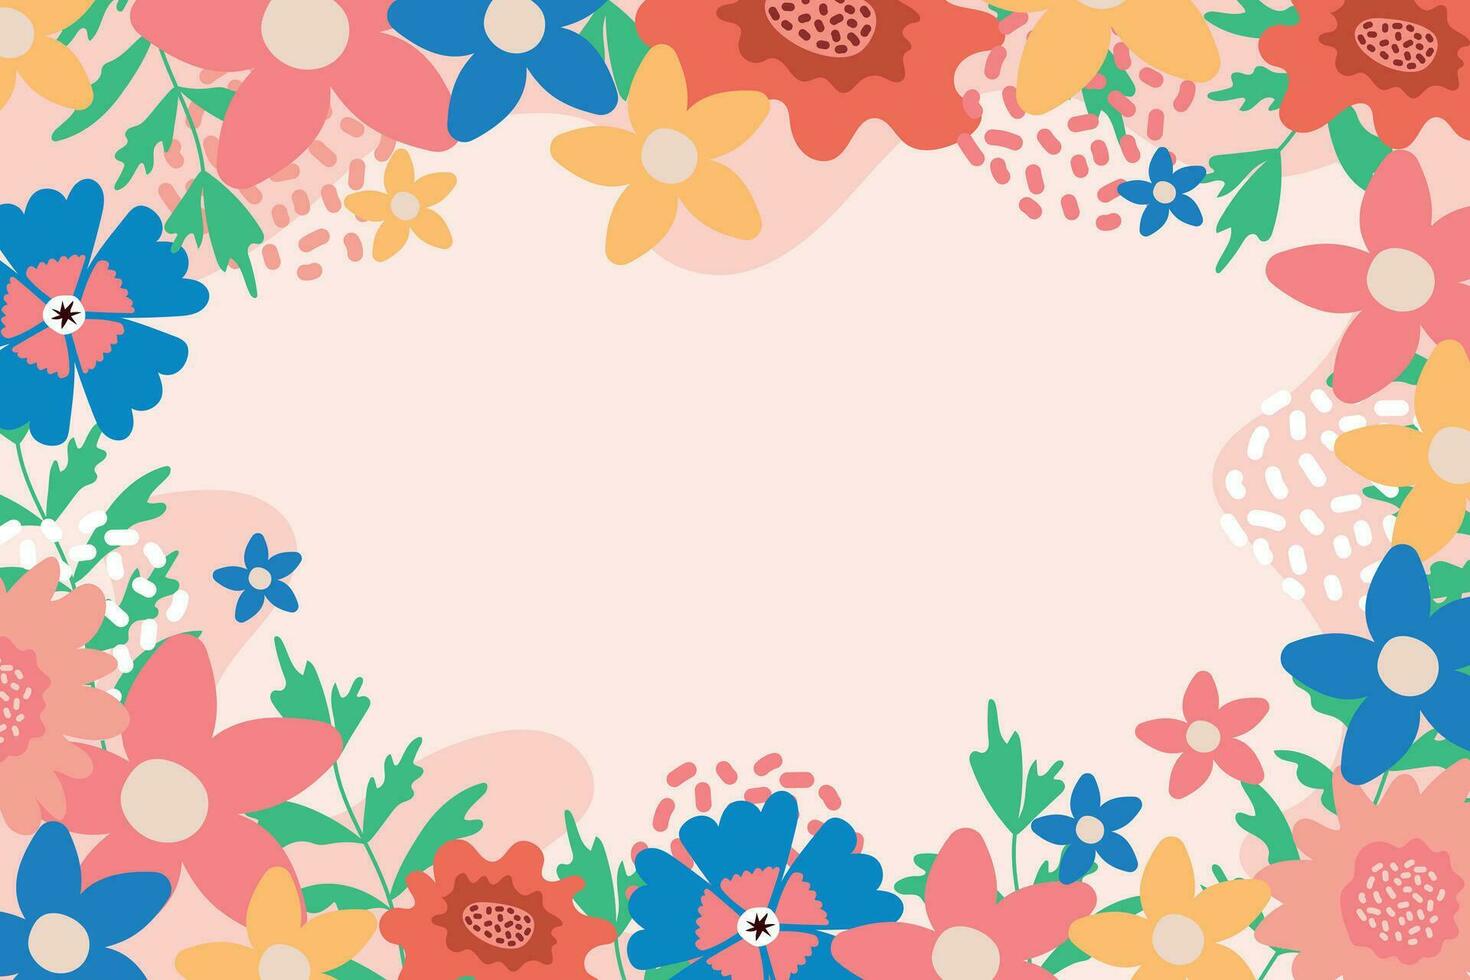 Minimalistic floral background with pink and blue flowers and green twigs. vector